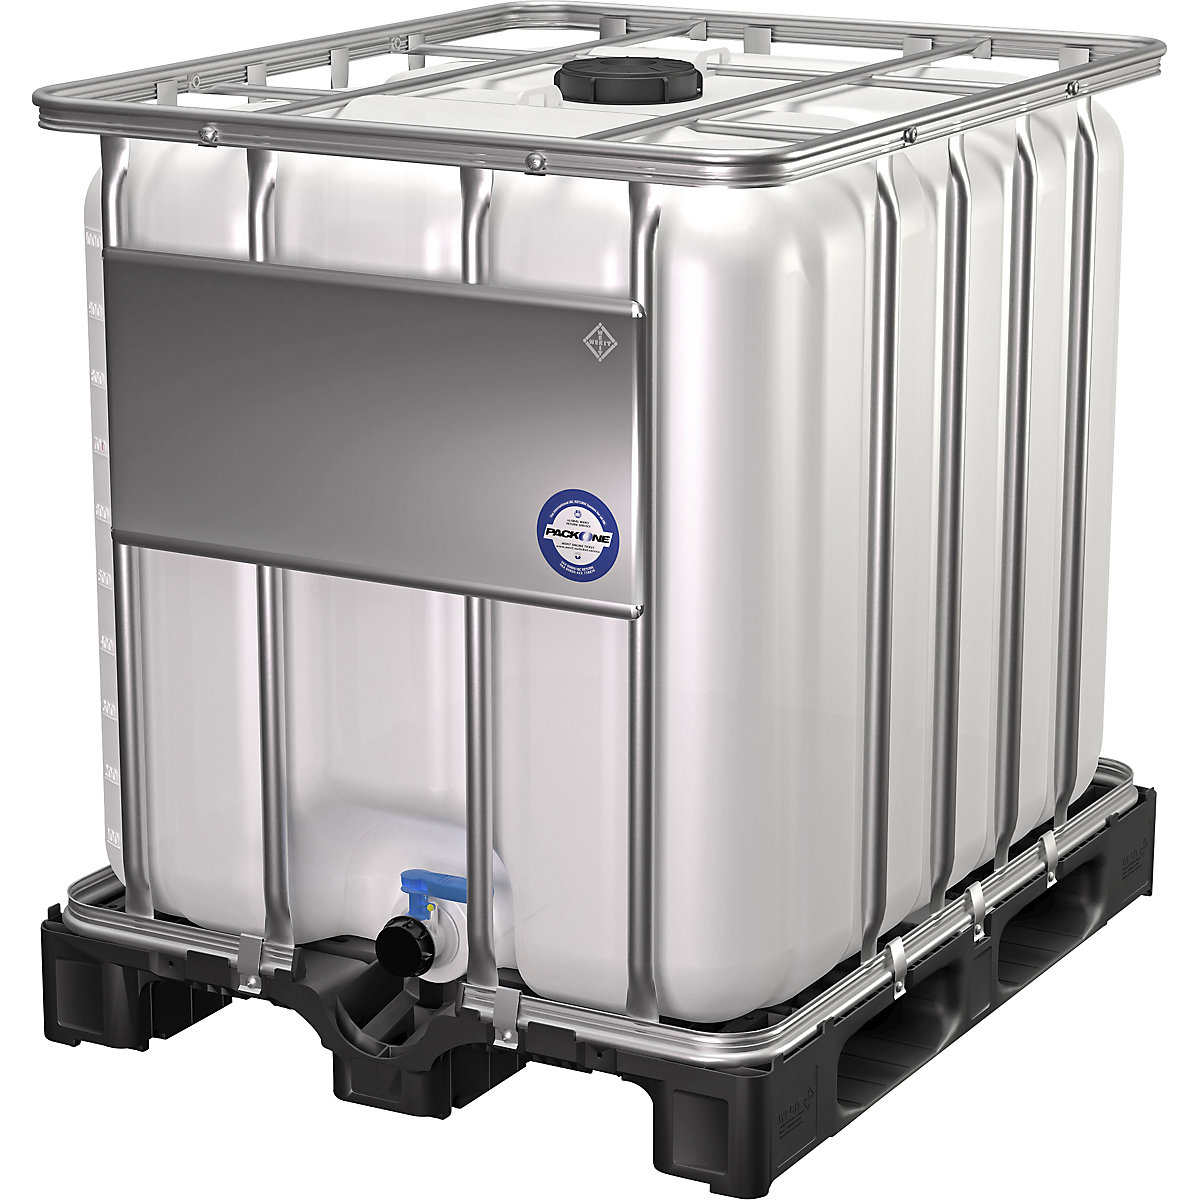 IBC container, standard